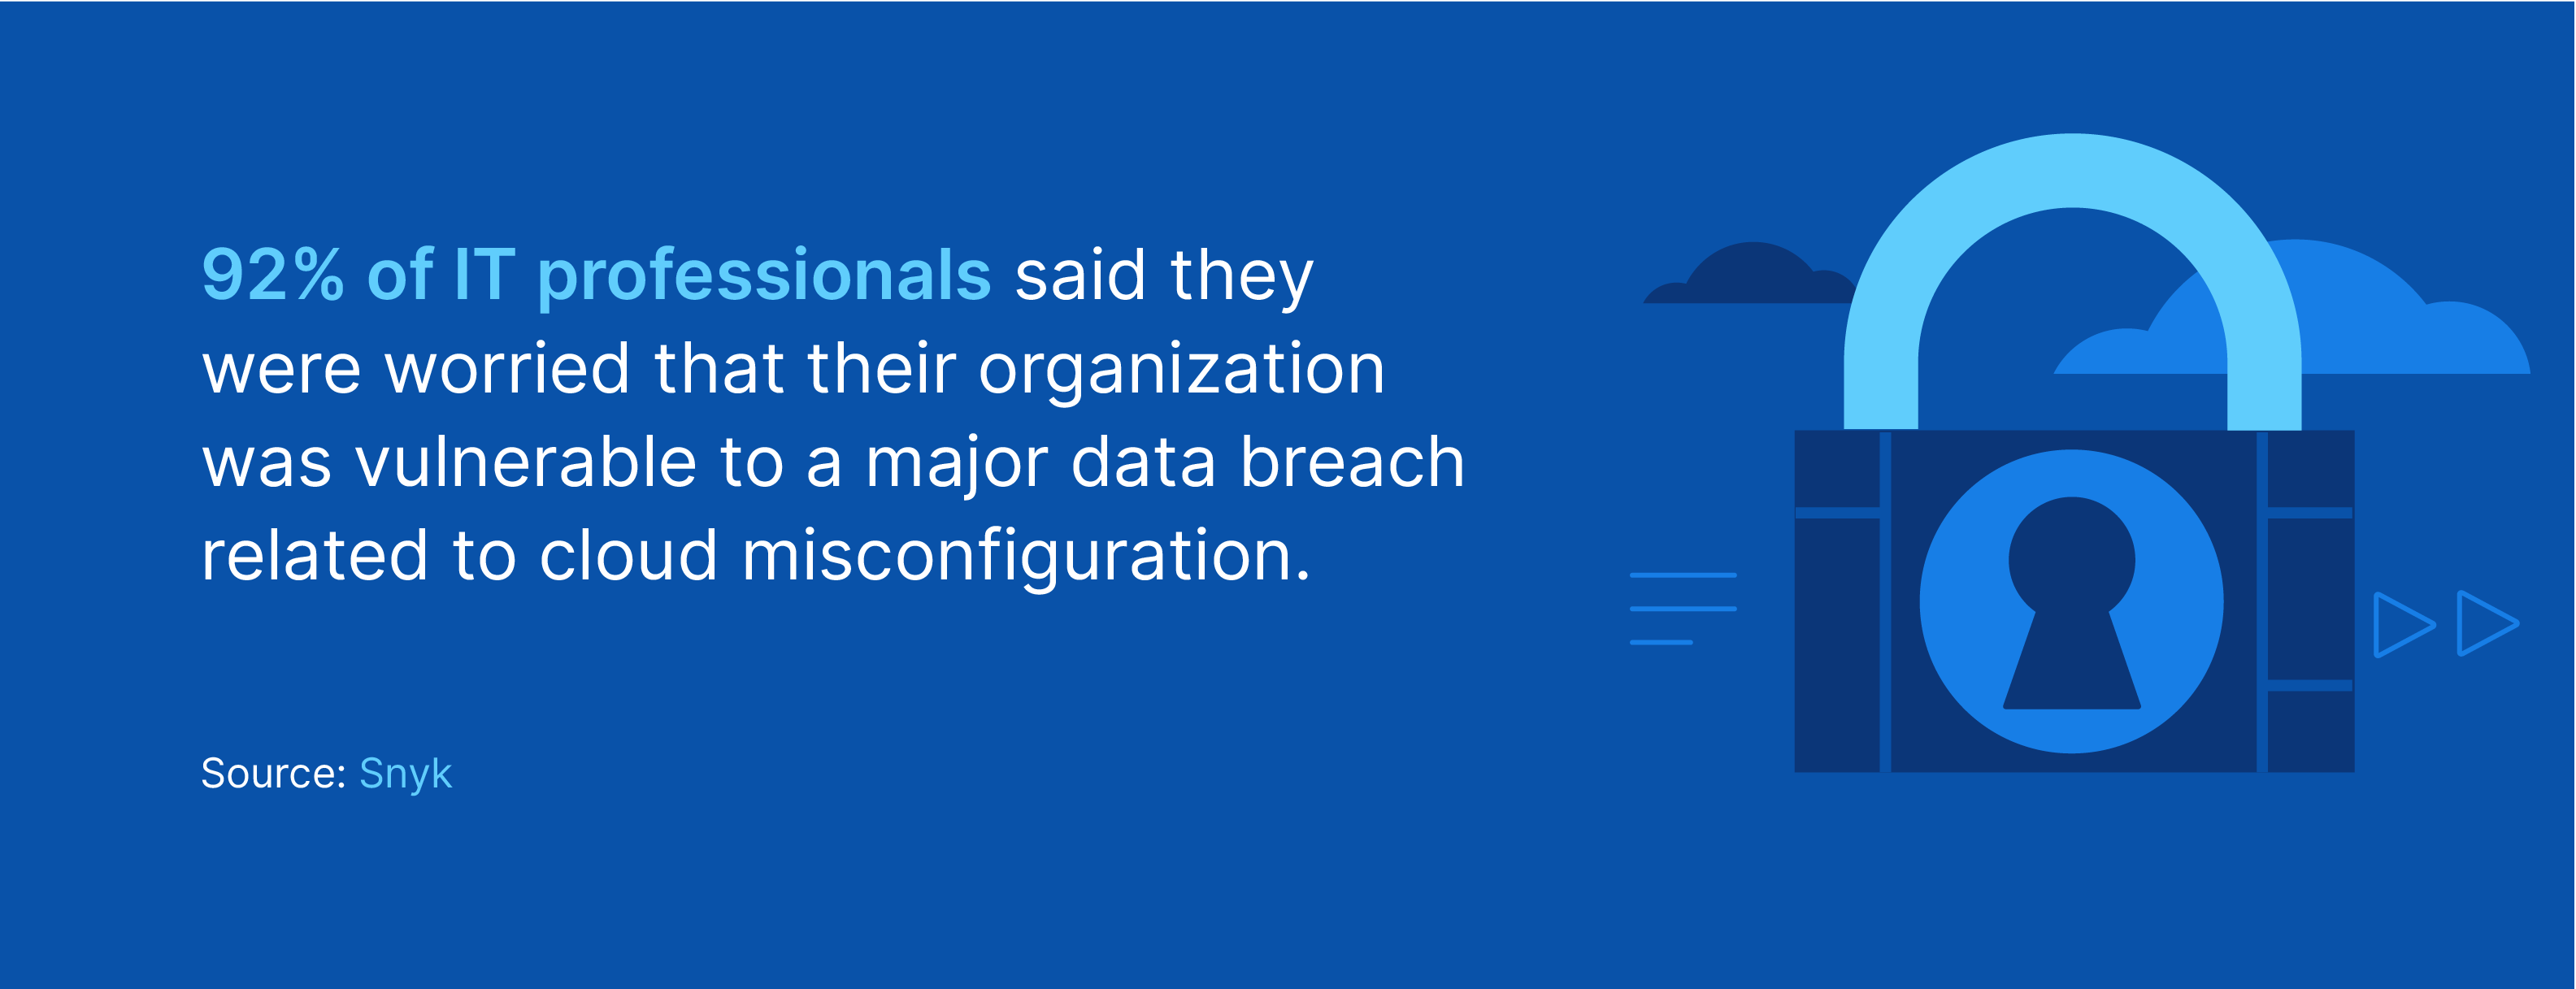 Snyk statistic that 92% of IT professionals are worried their organization was vulnerable to a major data breach related to a cloud misconfiguration